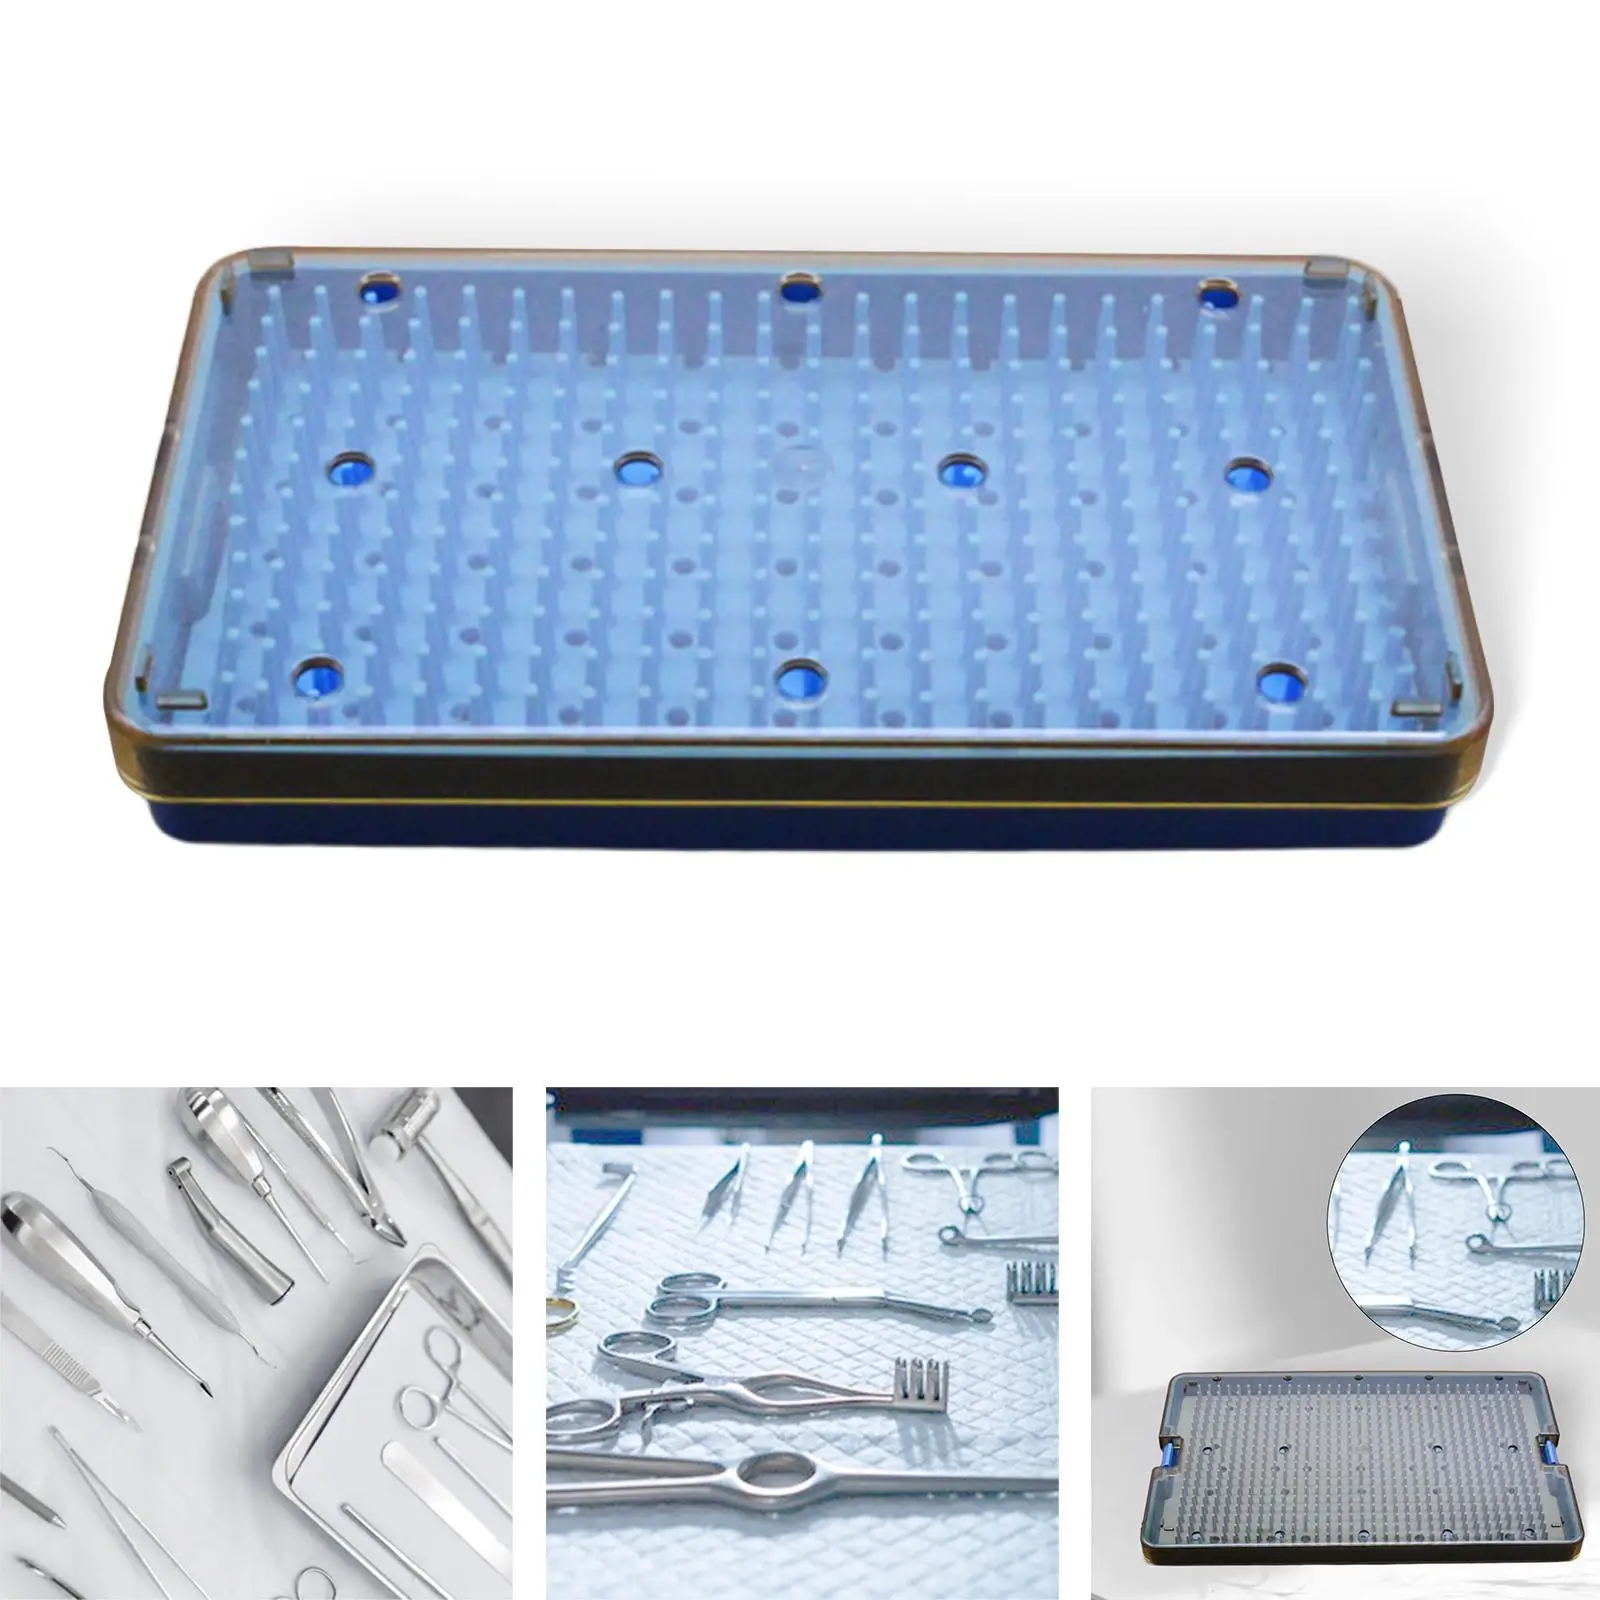 Silicone Sterilization Cassette Instruments Disinfection Box Disinfection Case Easy to Clean Sterilization Tray for Eye Tools